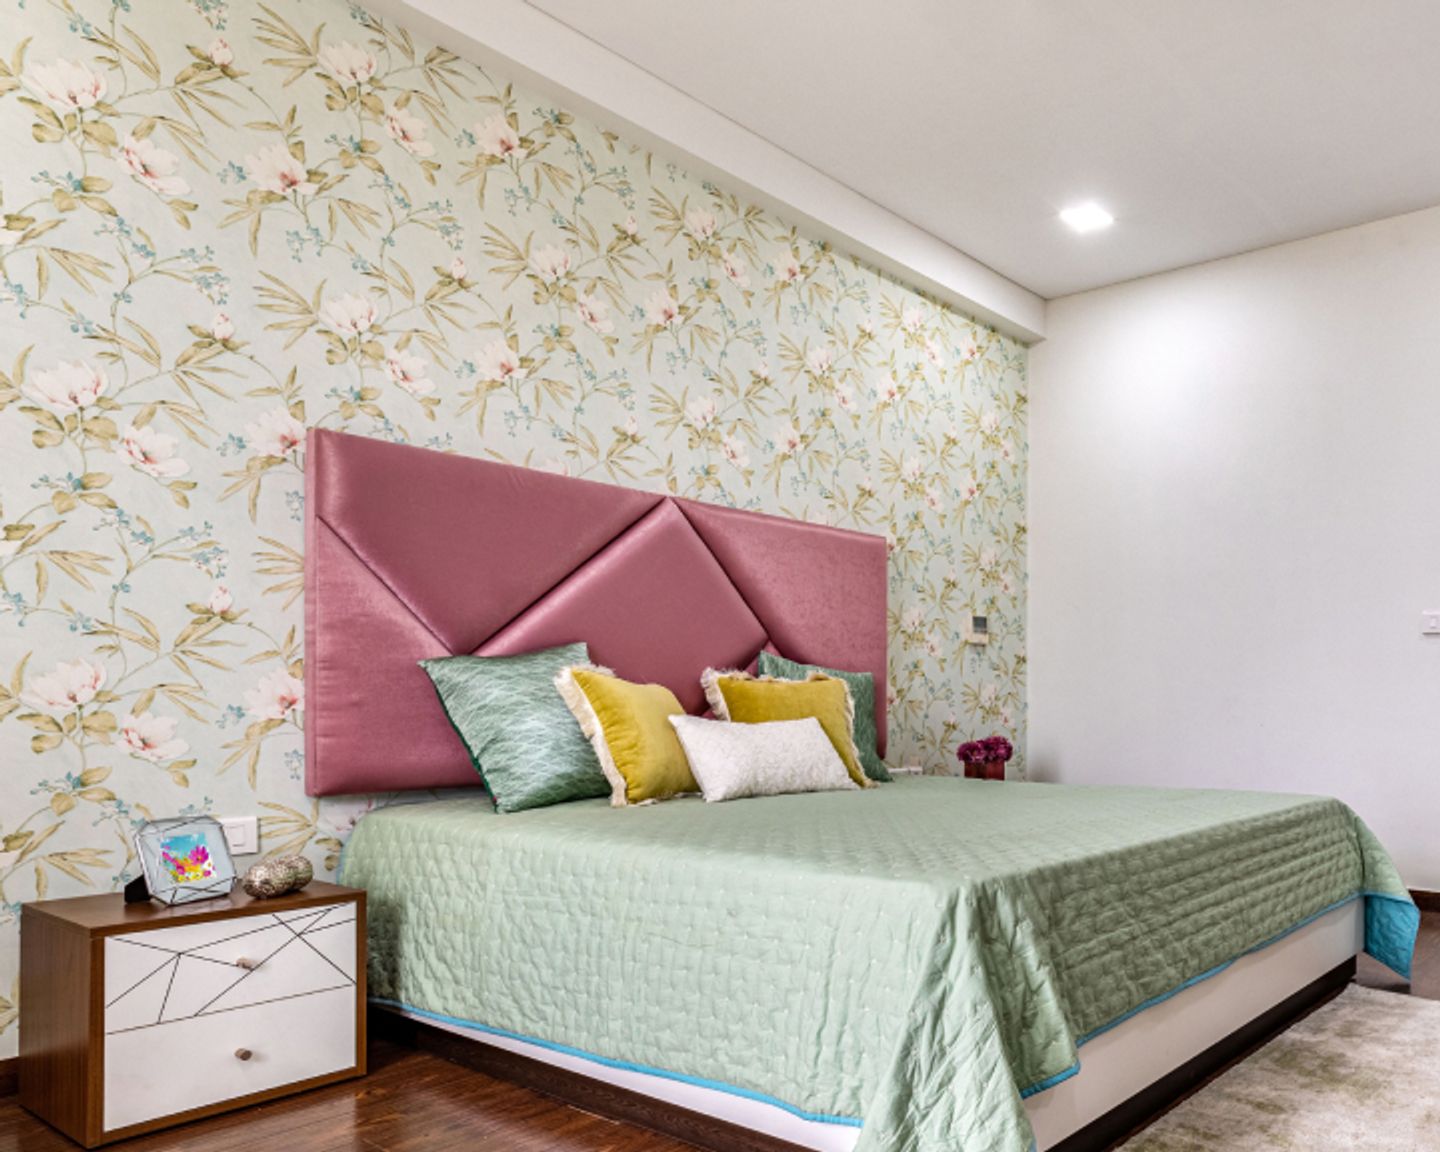 Floral Wallpaper Design For Contemporary Bedrooms - Livspace